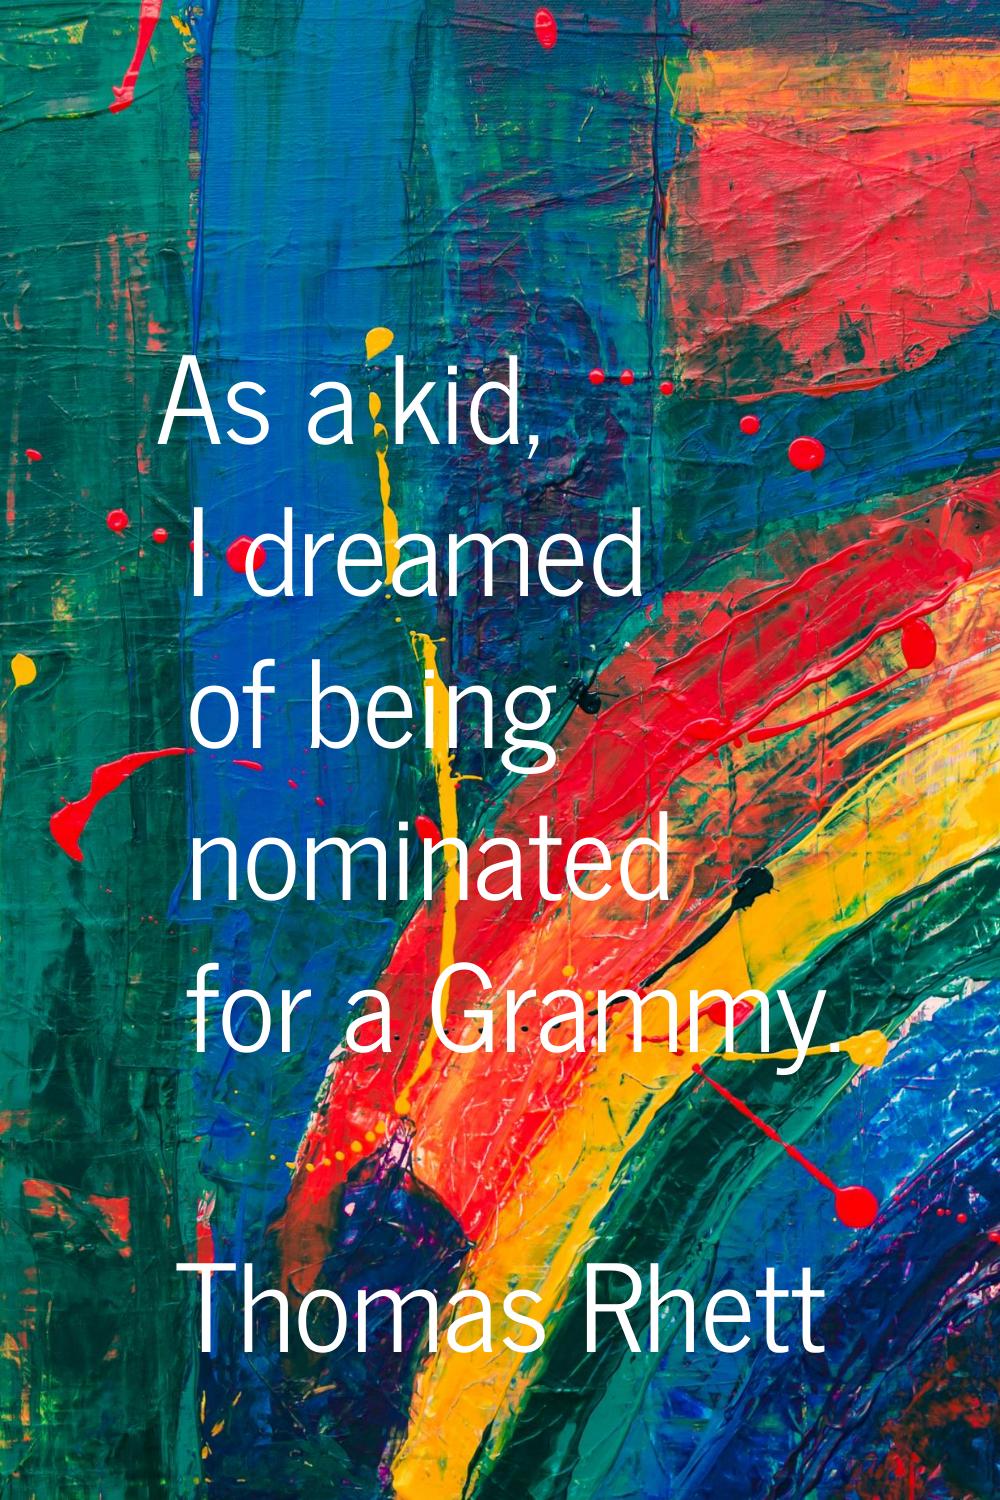 As a kid, I dreamed of being nominated for a Grammy.